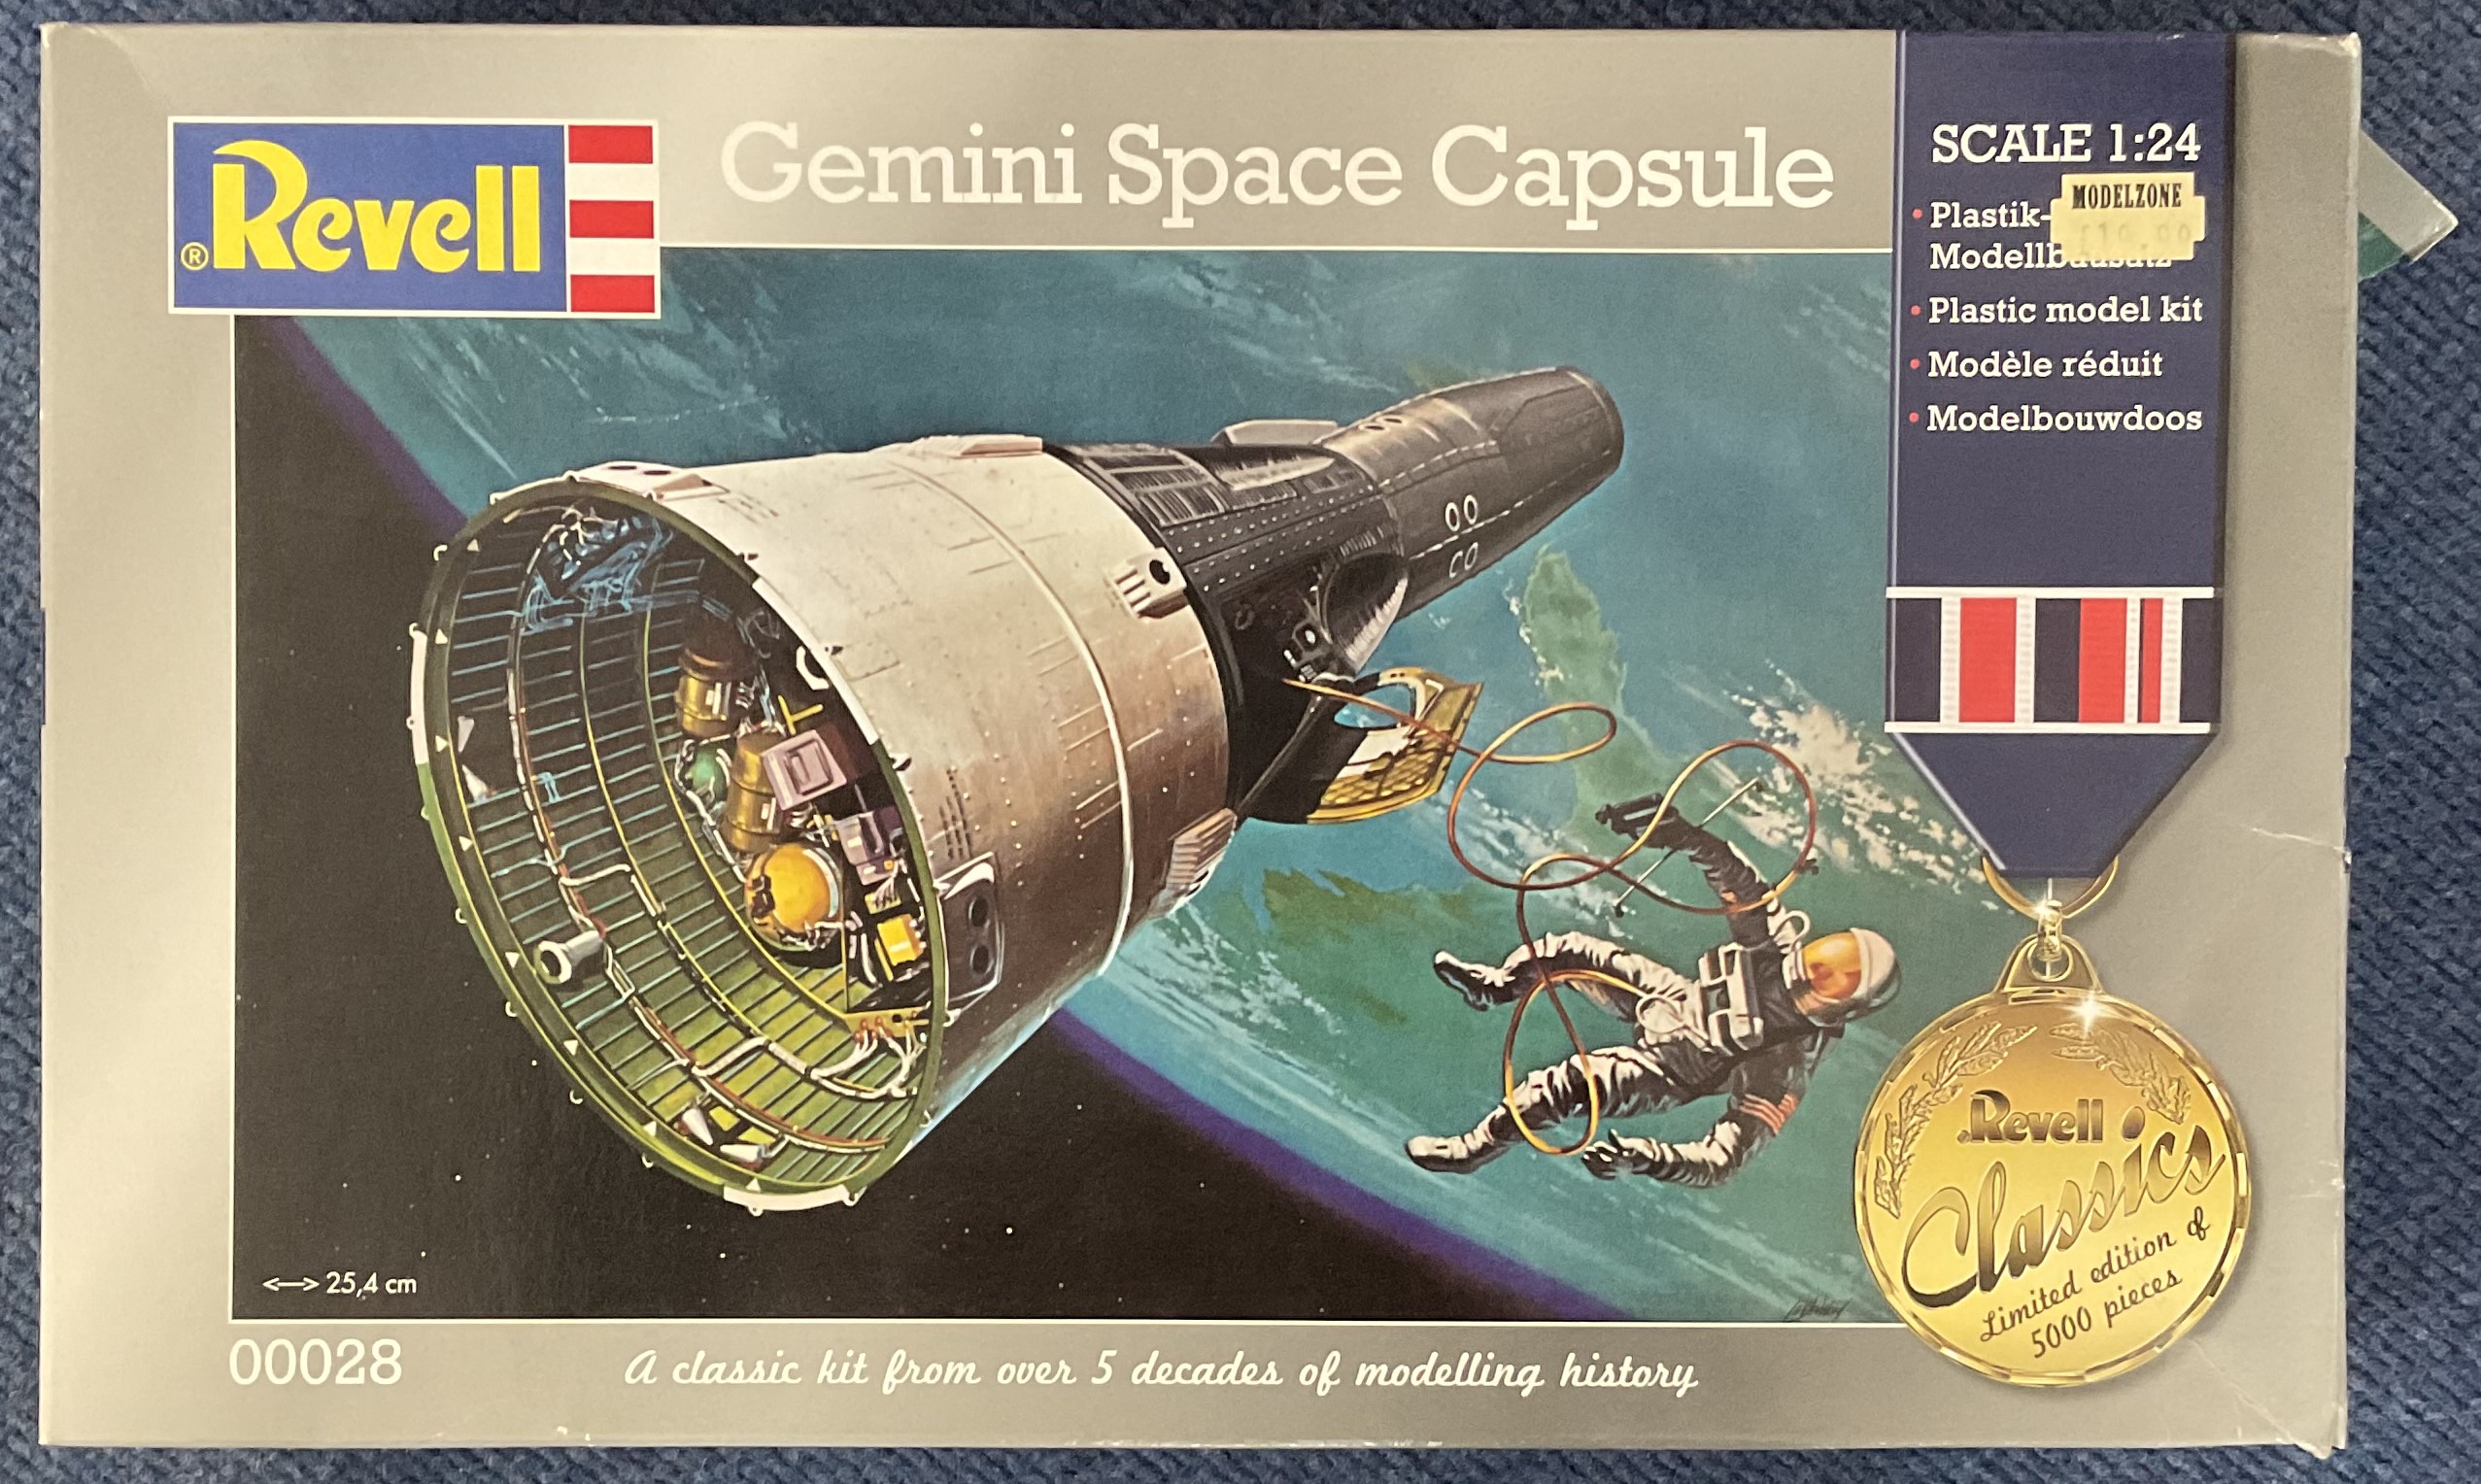 Gemini Space Capsule Plastic Model Kit (scale 1:24 Length 25.4 cm) by Revell 2012 outer box is